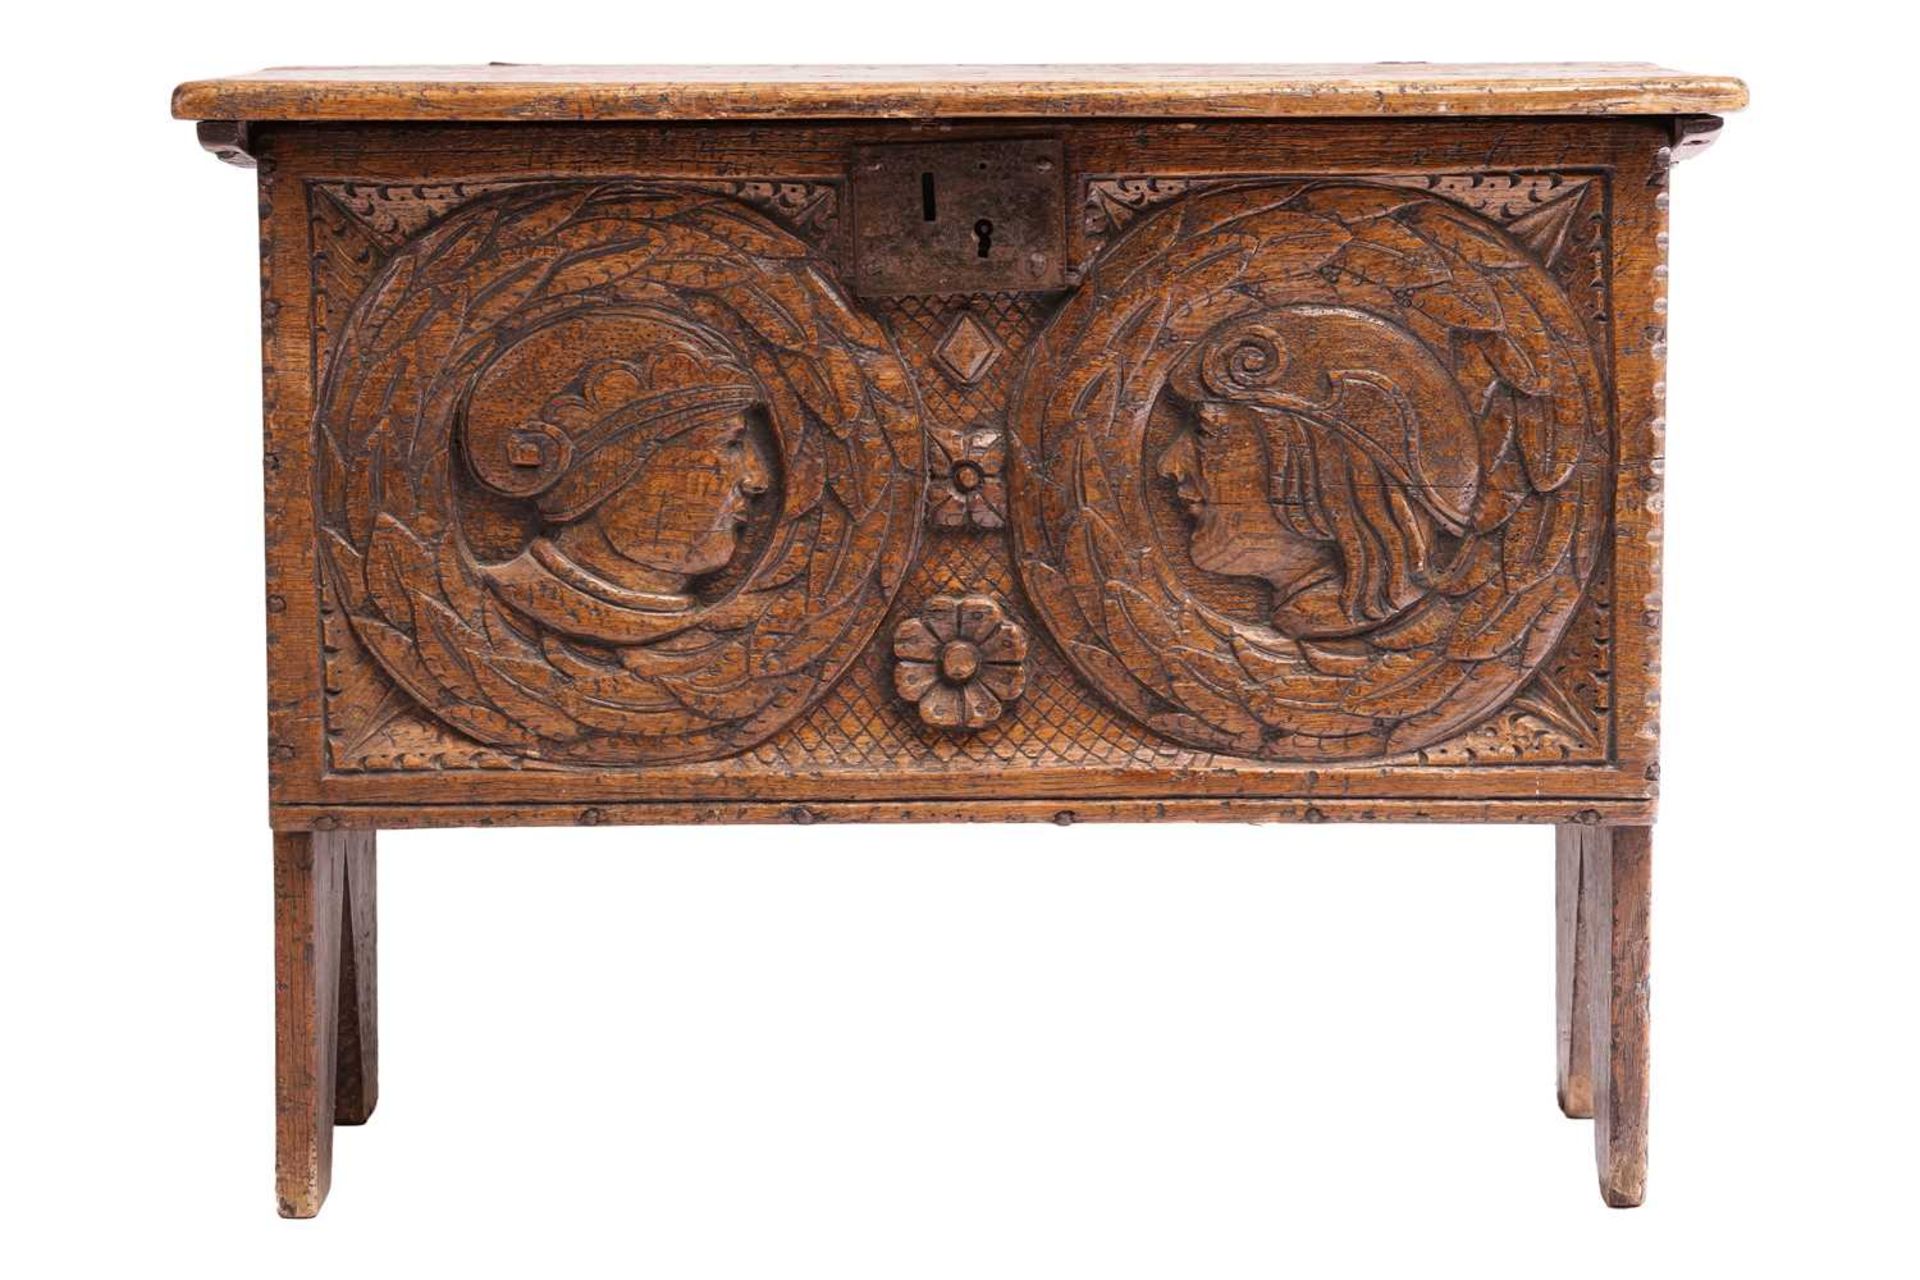 A small 17th-century style oak six-plank coffer, the frieze carved with Romanesque portrait roundels - Image 2 of 6